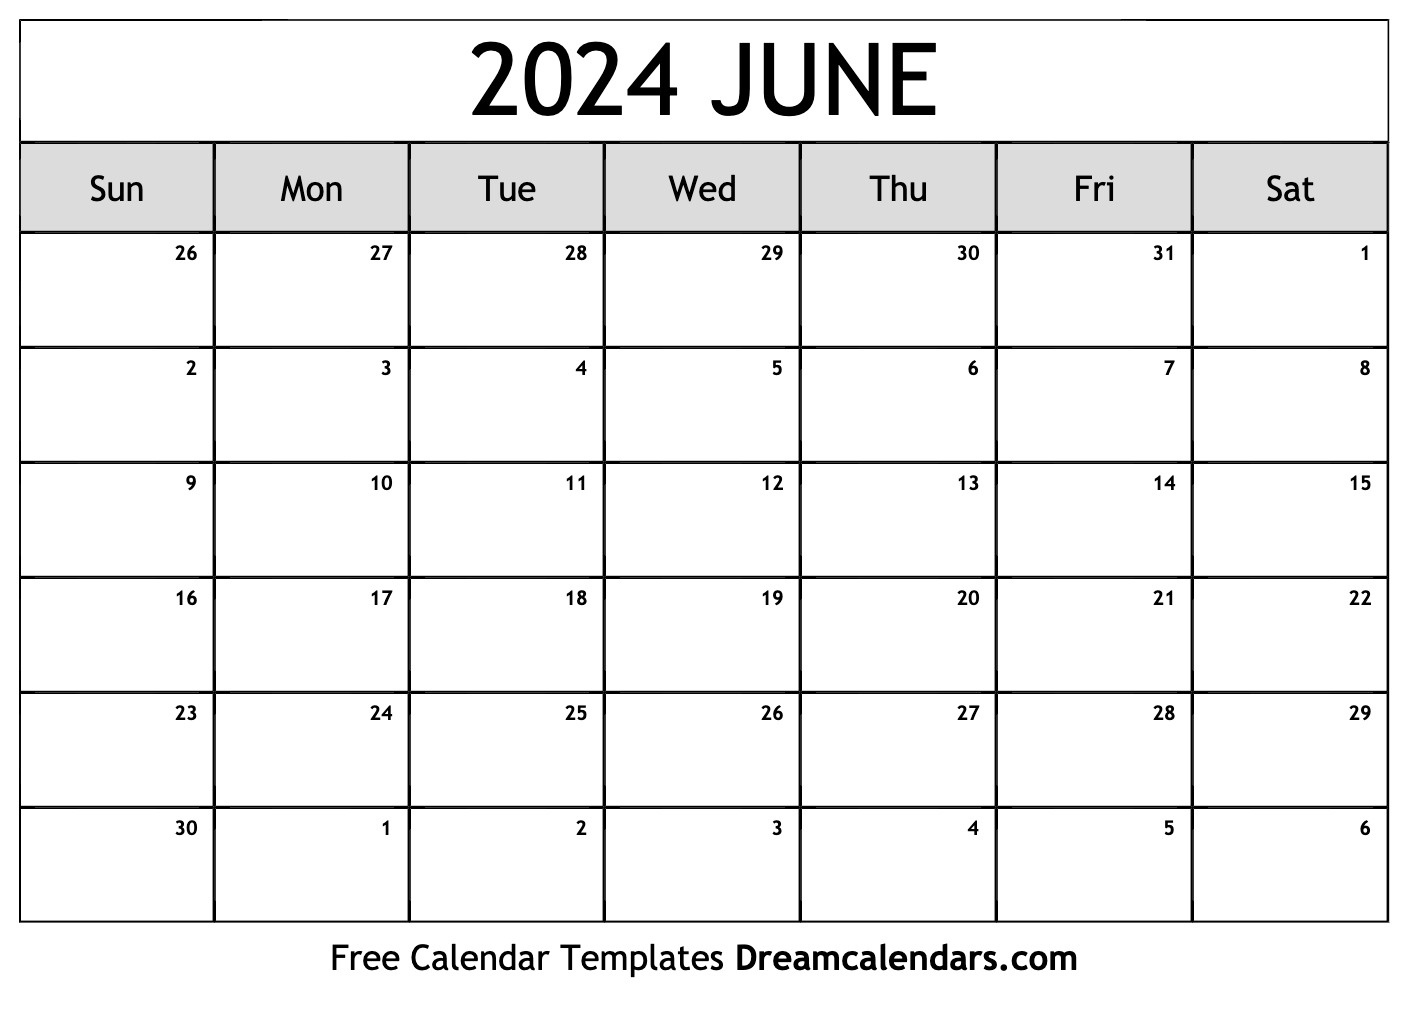 June 2024 Calendar - Free Printable With Holidays And Observances throughout June 2 2024 Calendar